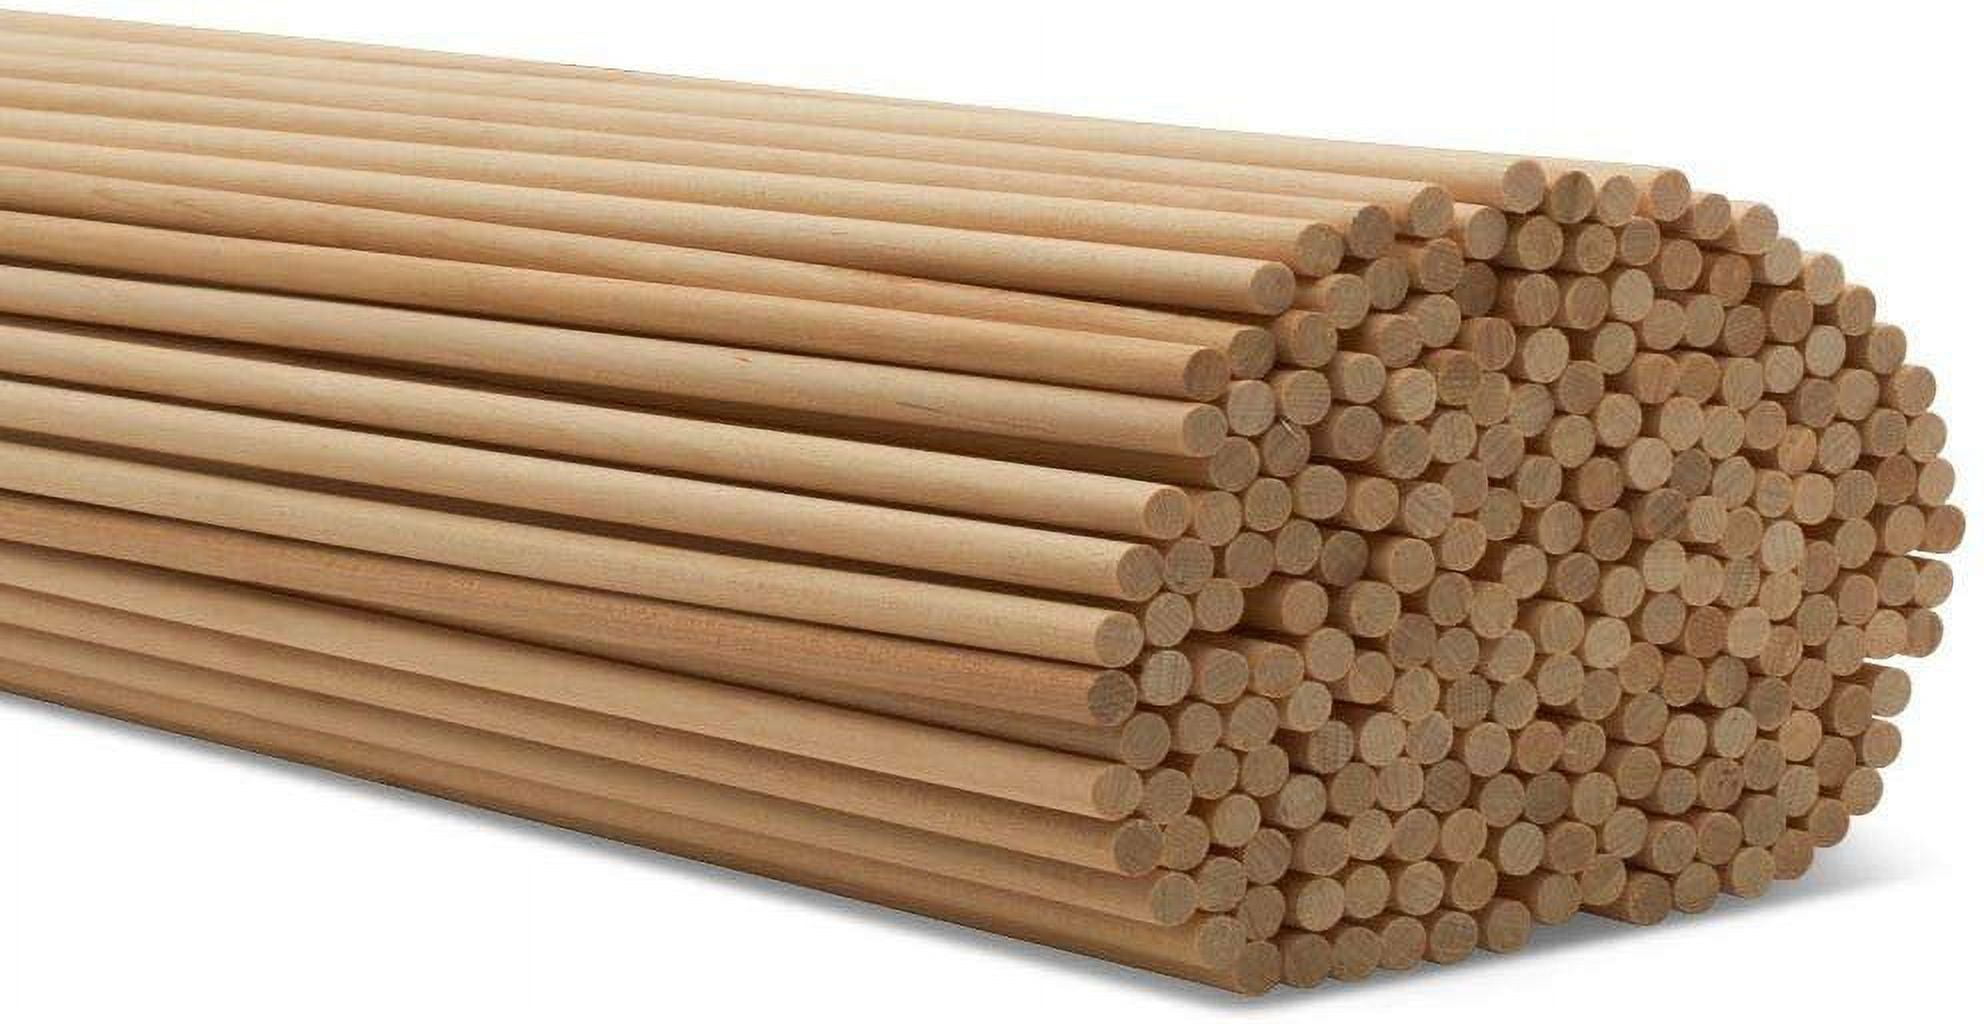 Dowel Rods Wood Sticks Wooden Dowel Rods - 1/2 x 72 Inch Unfinished  Hardwood Sticks - for Crafts and DIYers - 10 Pieces by Woodpeckers